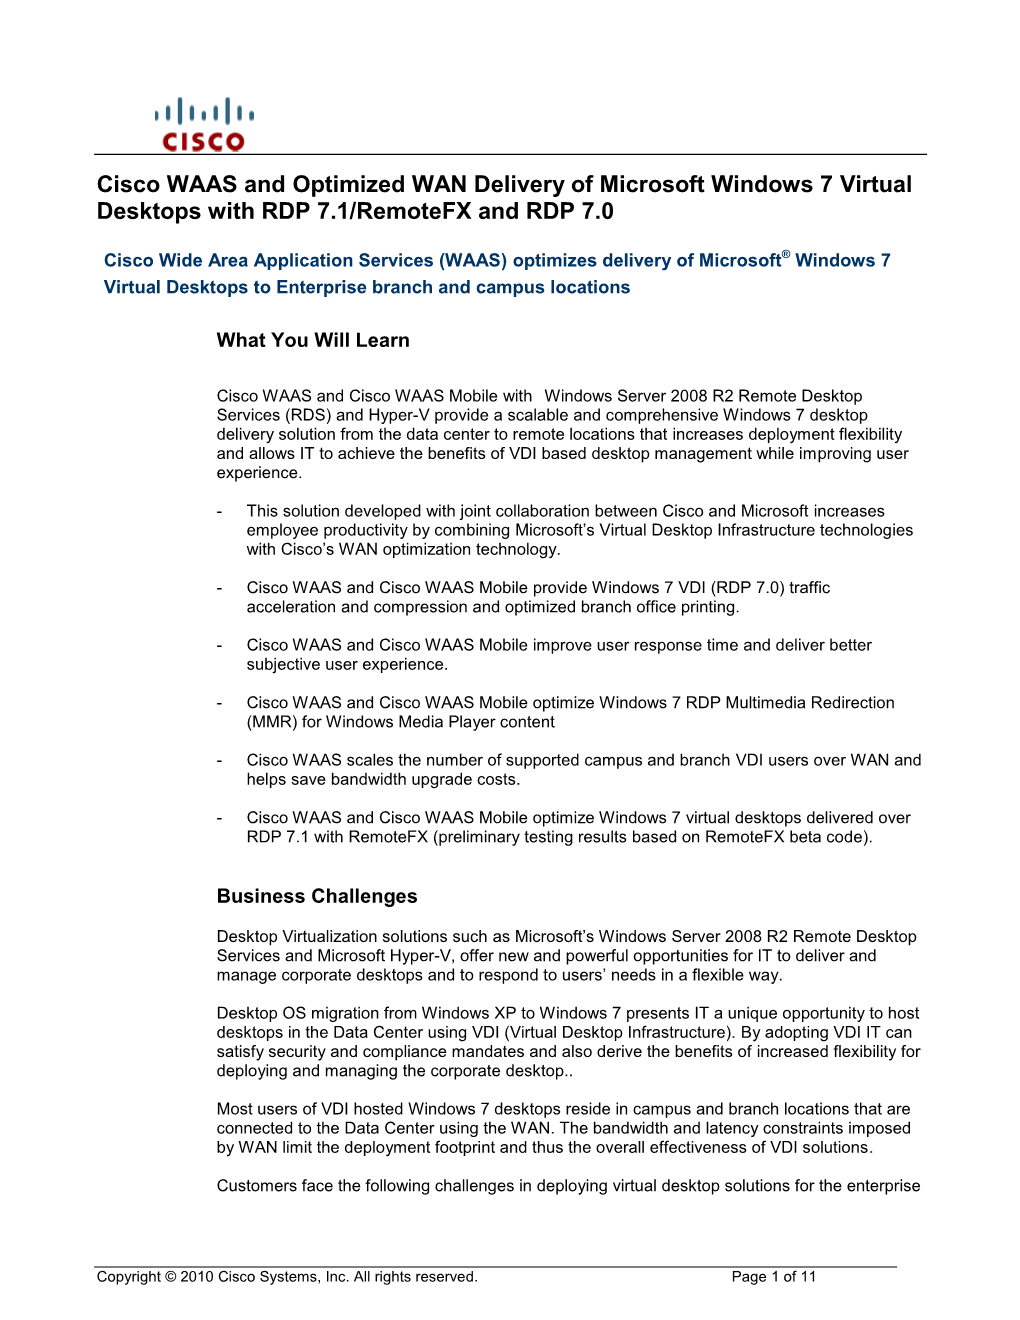 Cisco WAAS and Optimized WAN Delivery of Microsoft Windows 7 Virtual Desktops with RDP 7.1/Remotefx and RDP 7.0